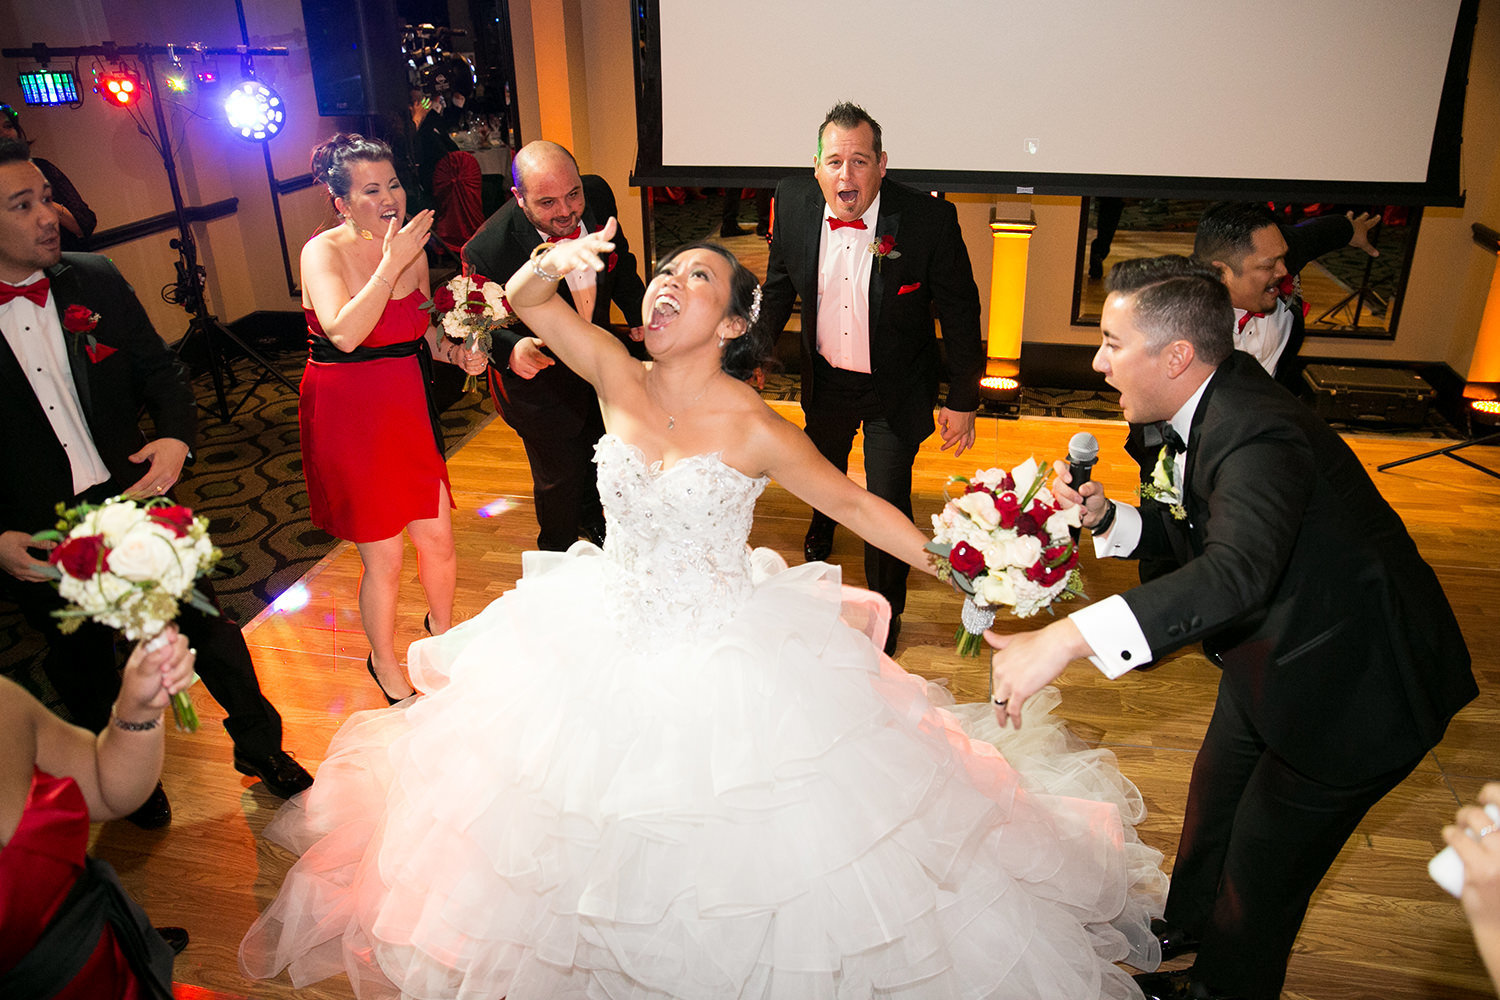 Hilarious moment during a choreographed flash mob wedding dance